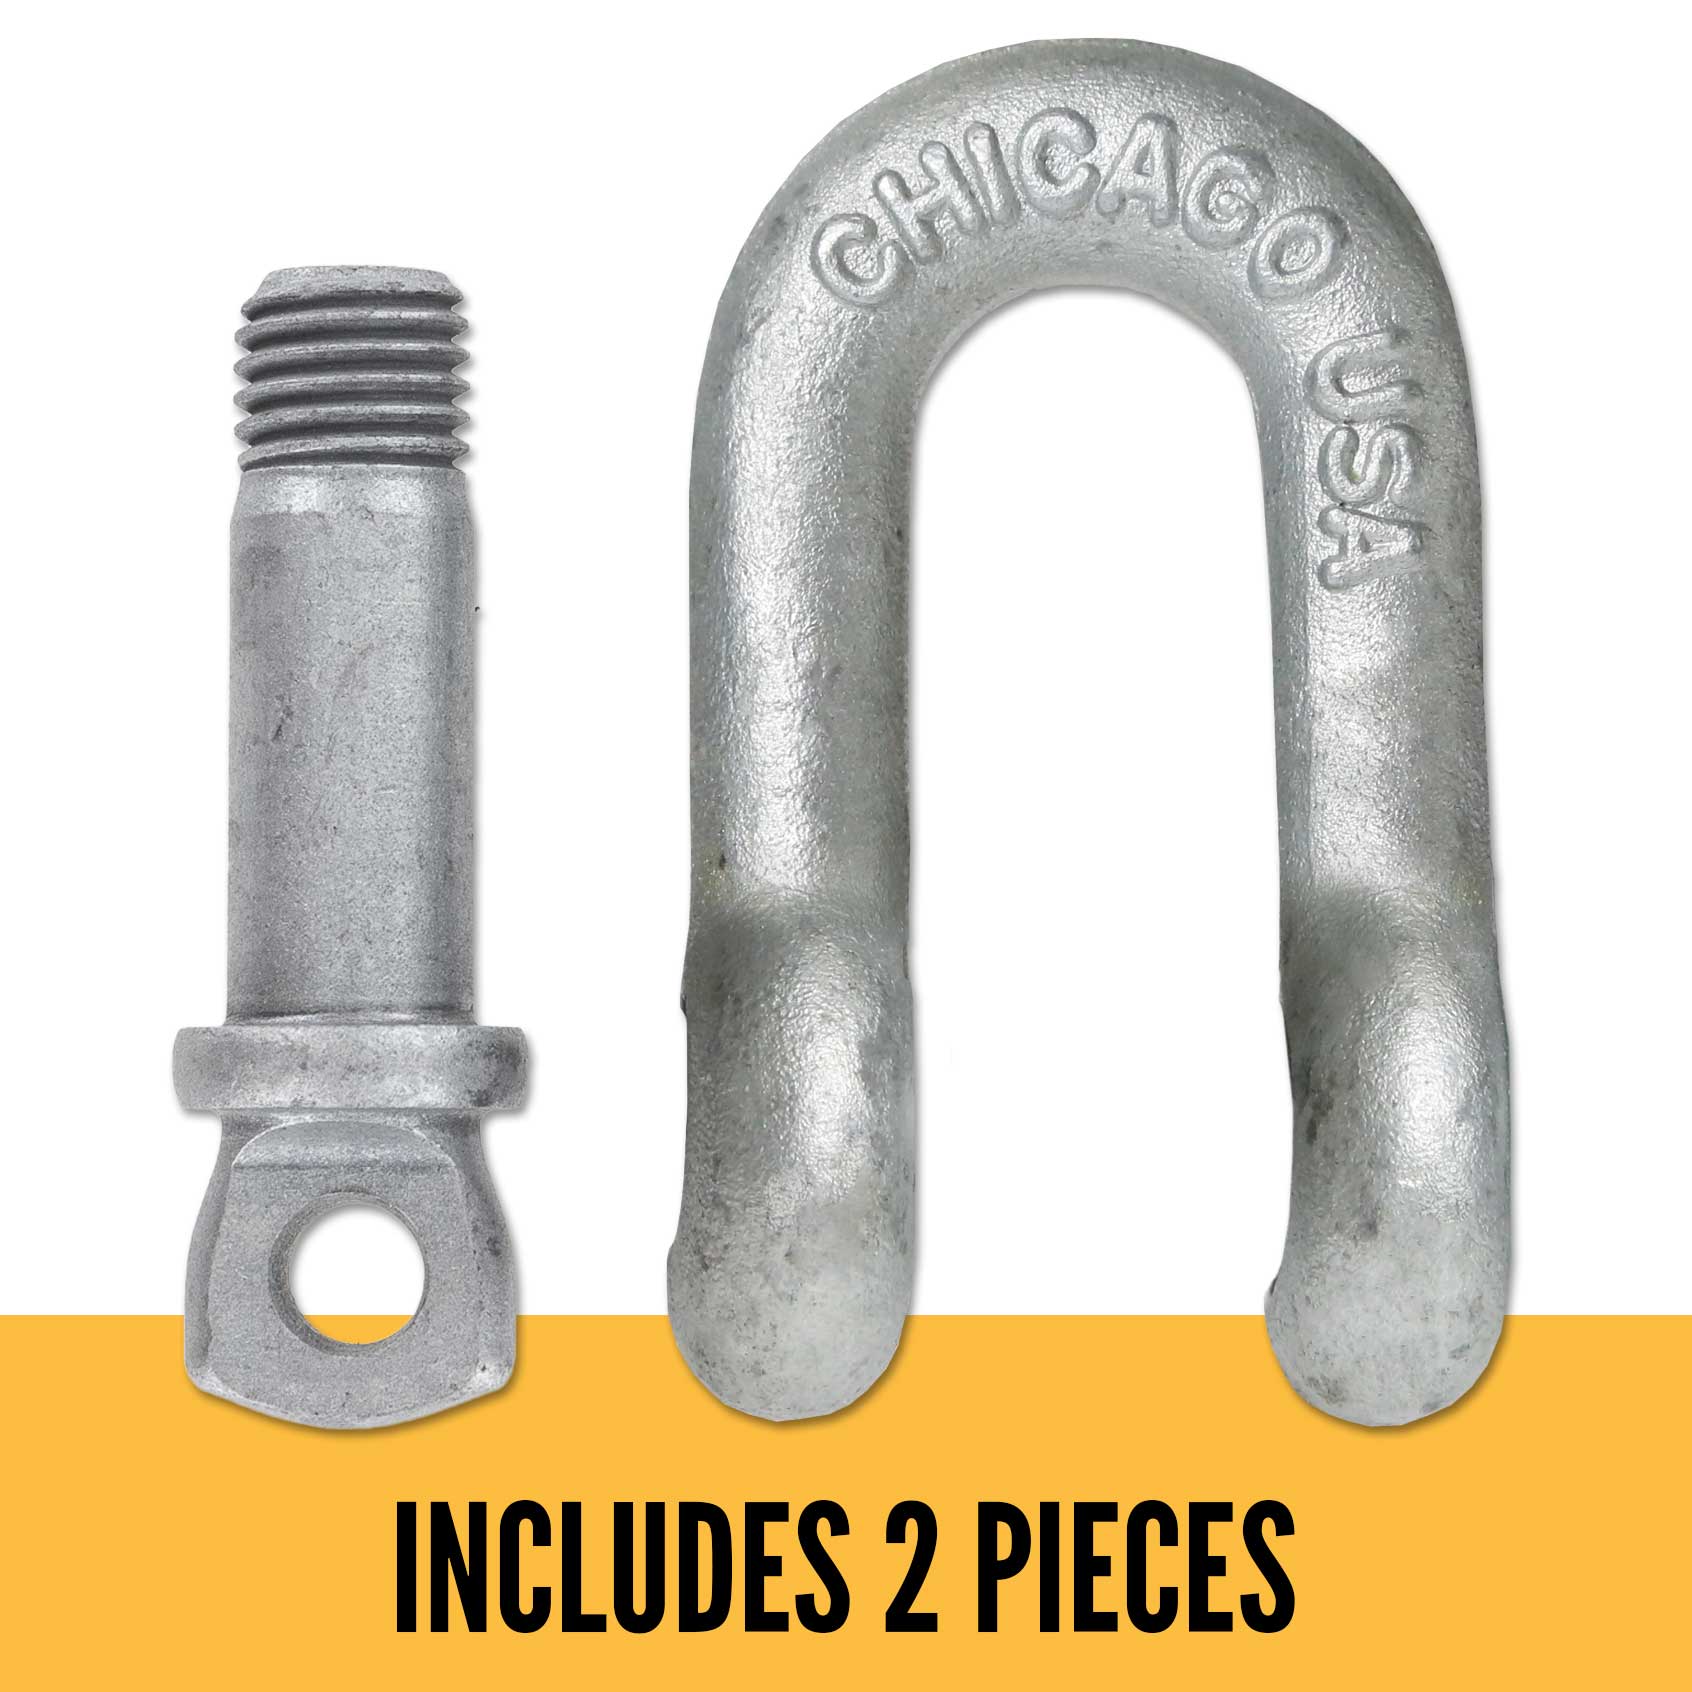 Screw Pin Chain Shackle - Chicago Hardware - 7/8" Galvanized Steel - 6.5 Ton parts of a shackle